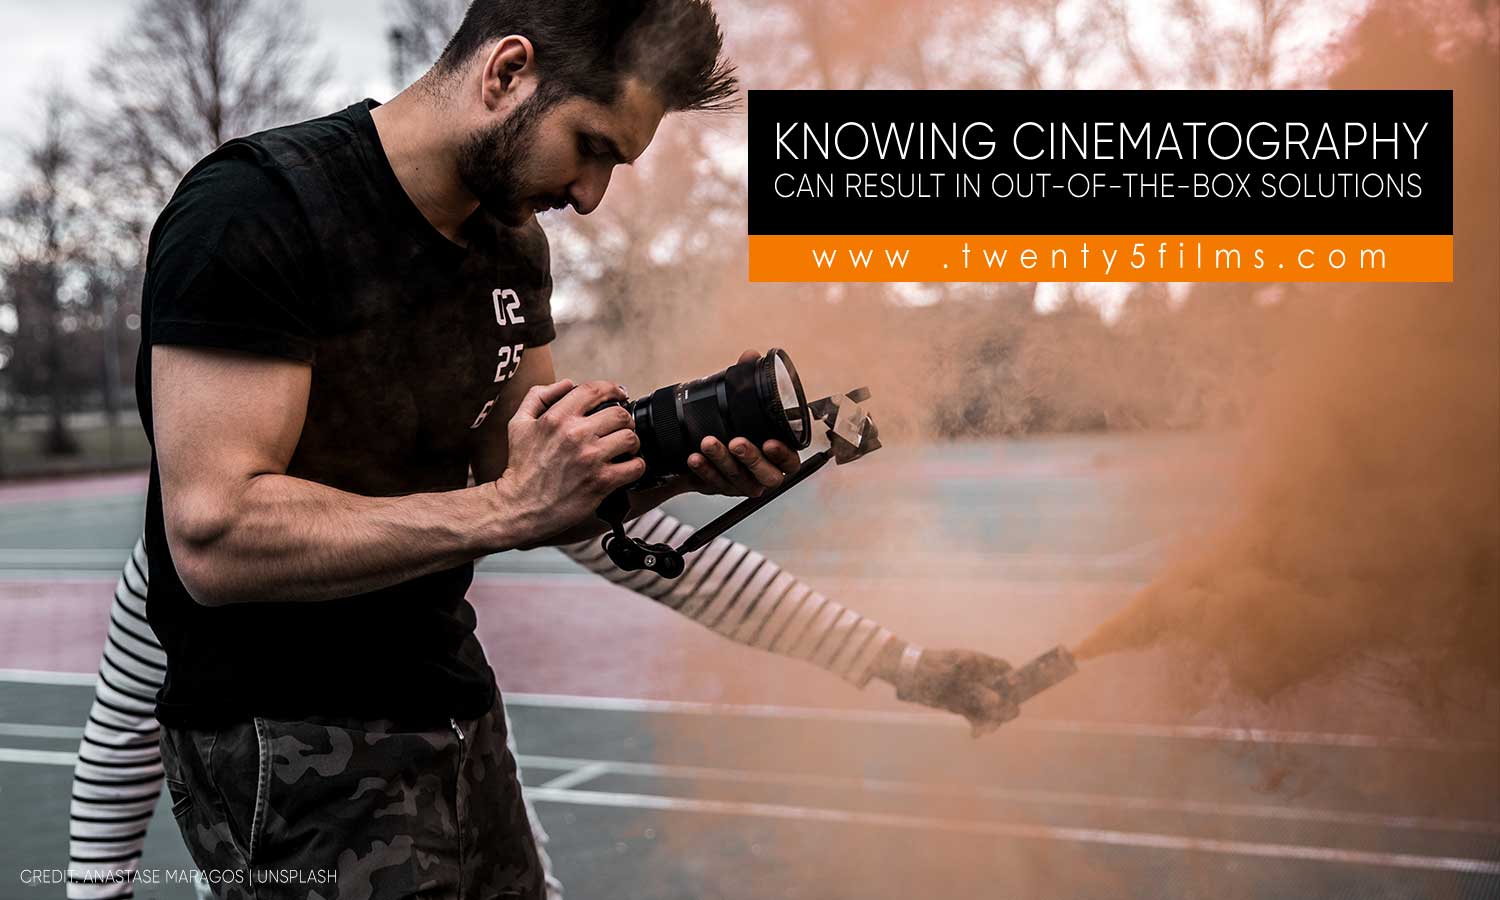 Knowing cinematography can result in out-of-the-box solutions